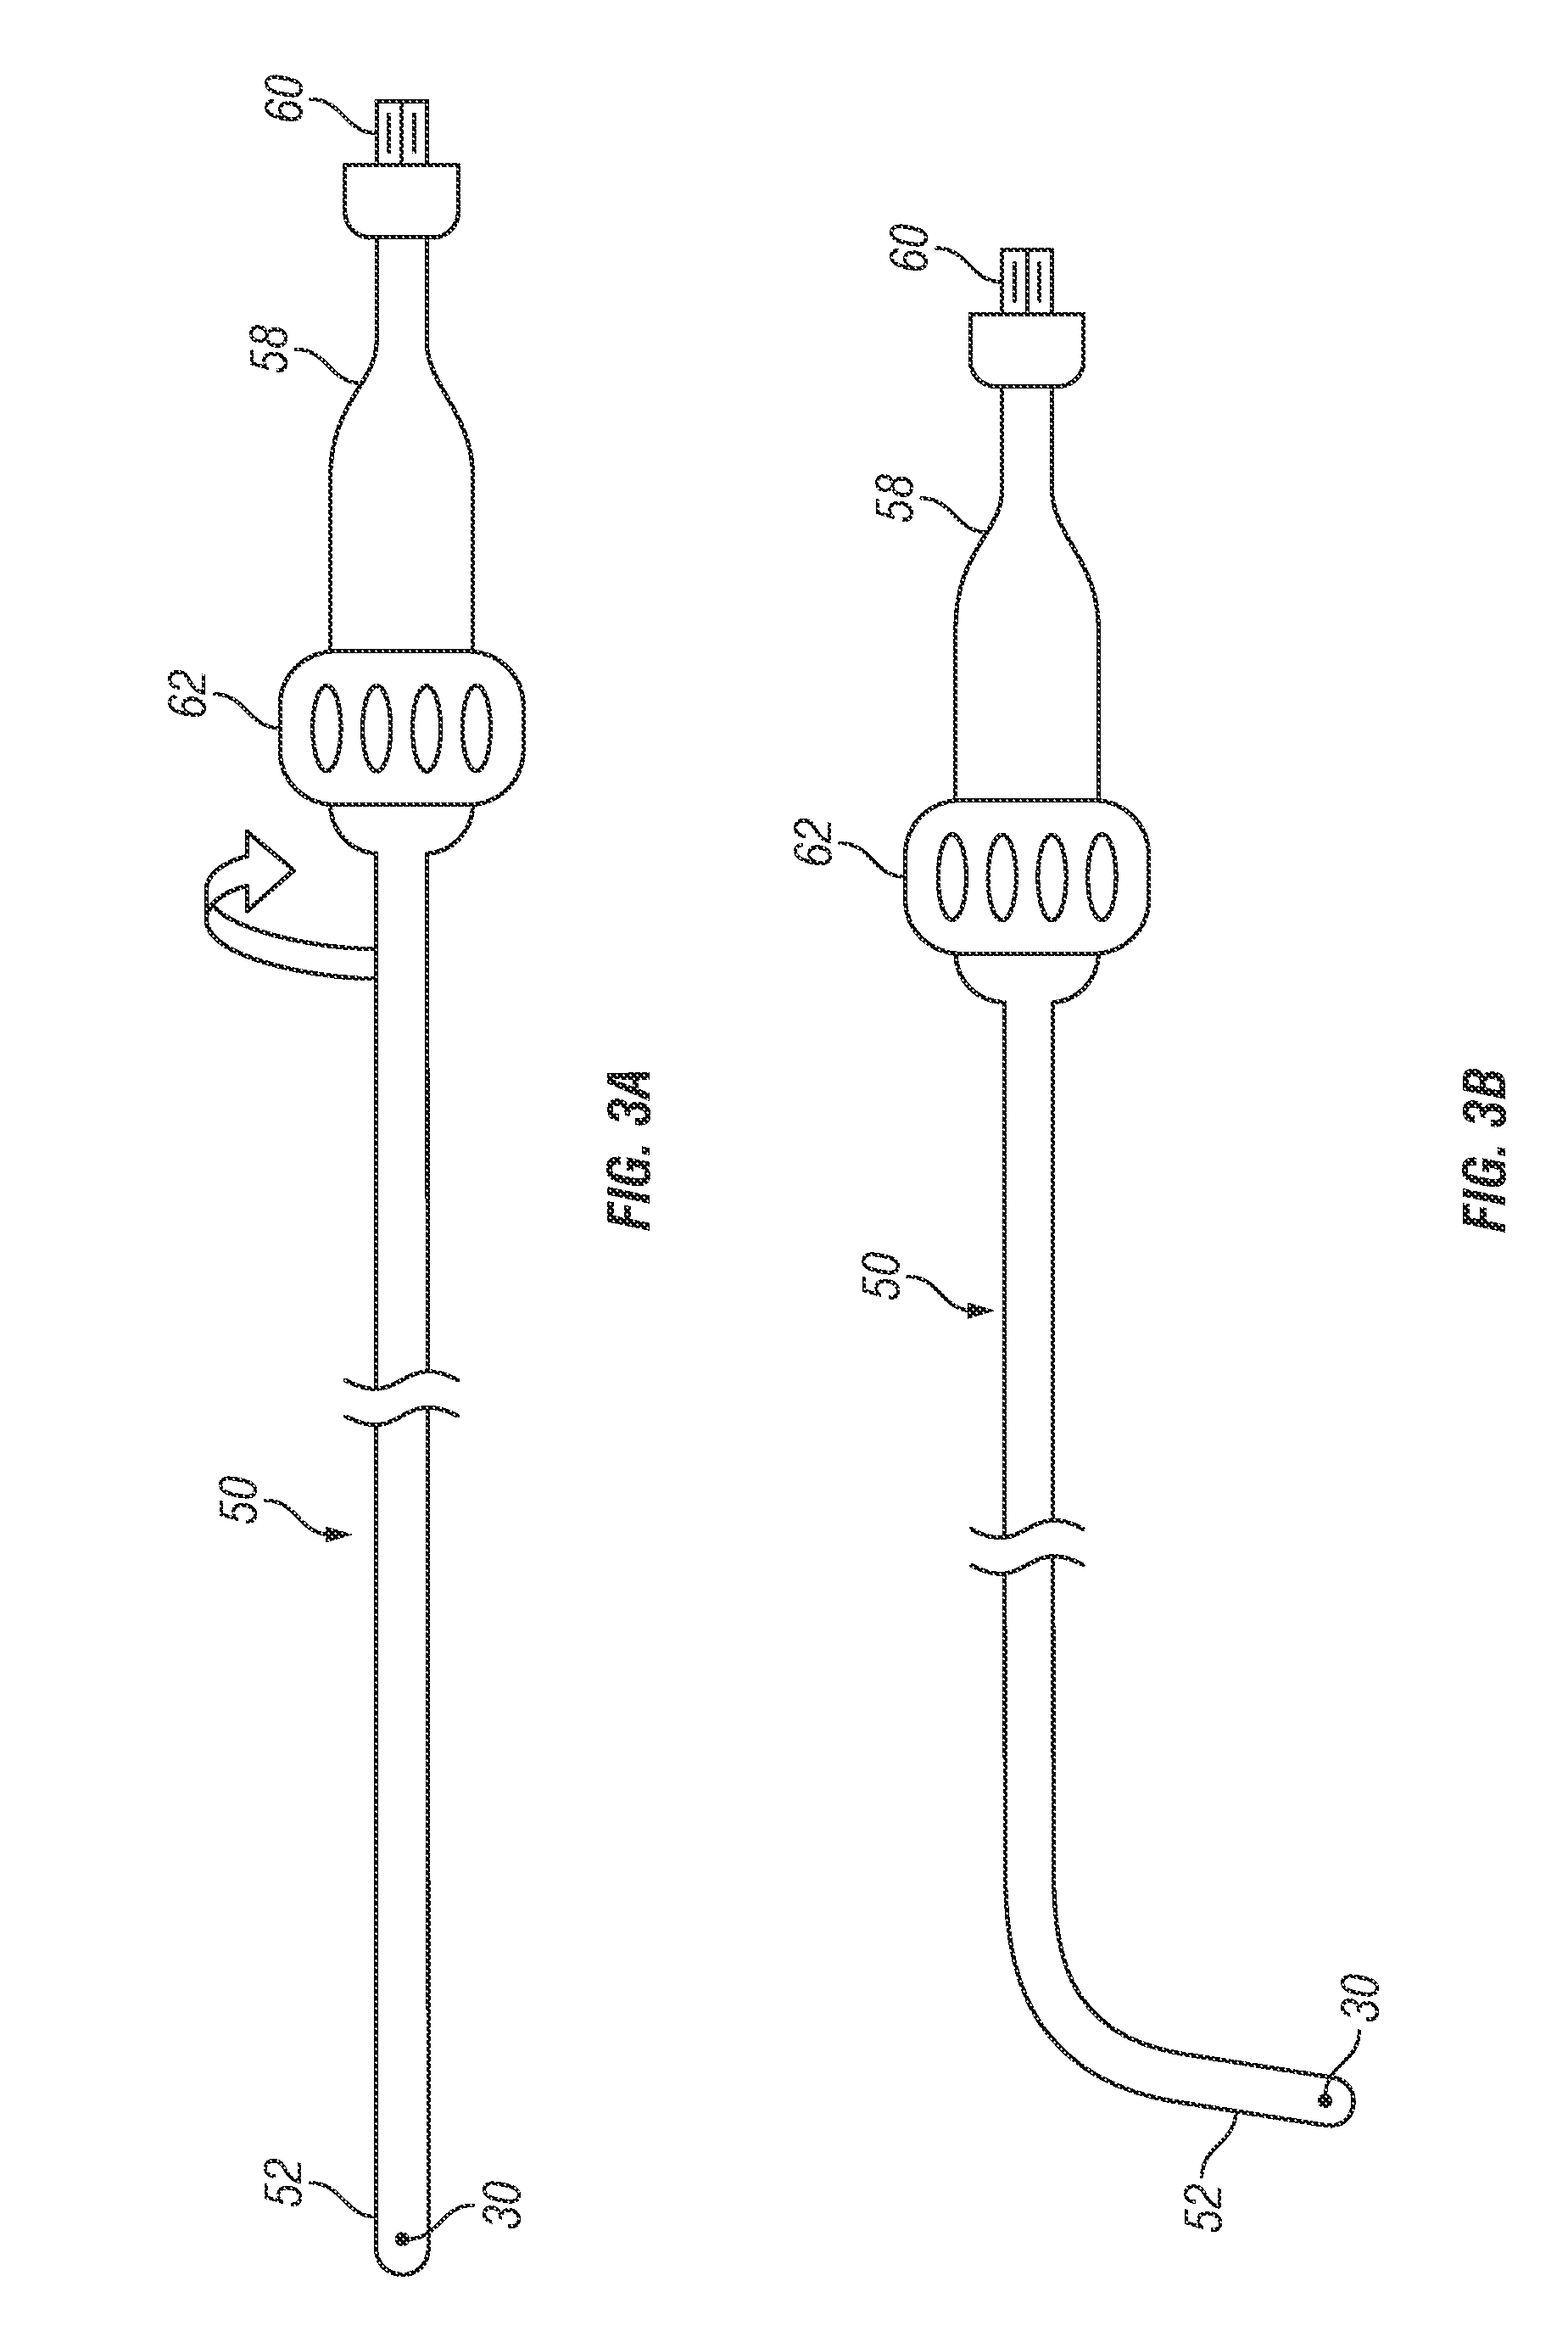 Radio frequency ablation system with tracking sensor